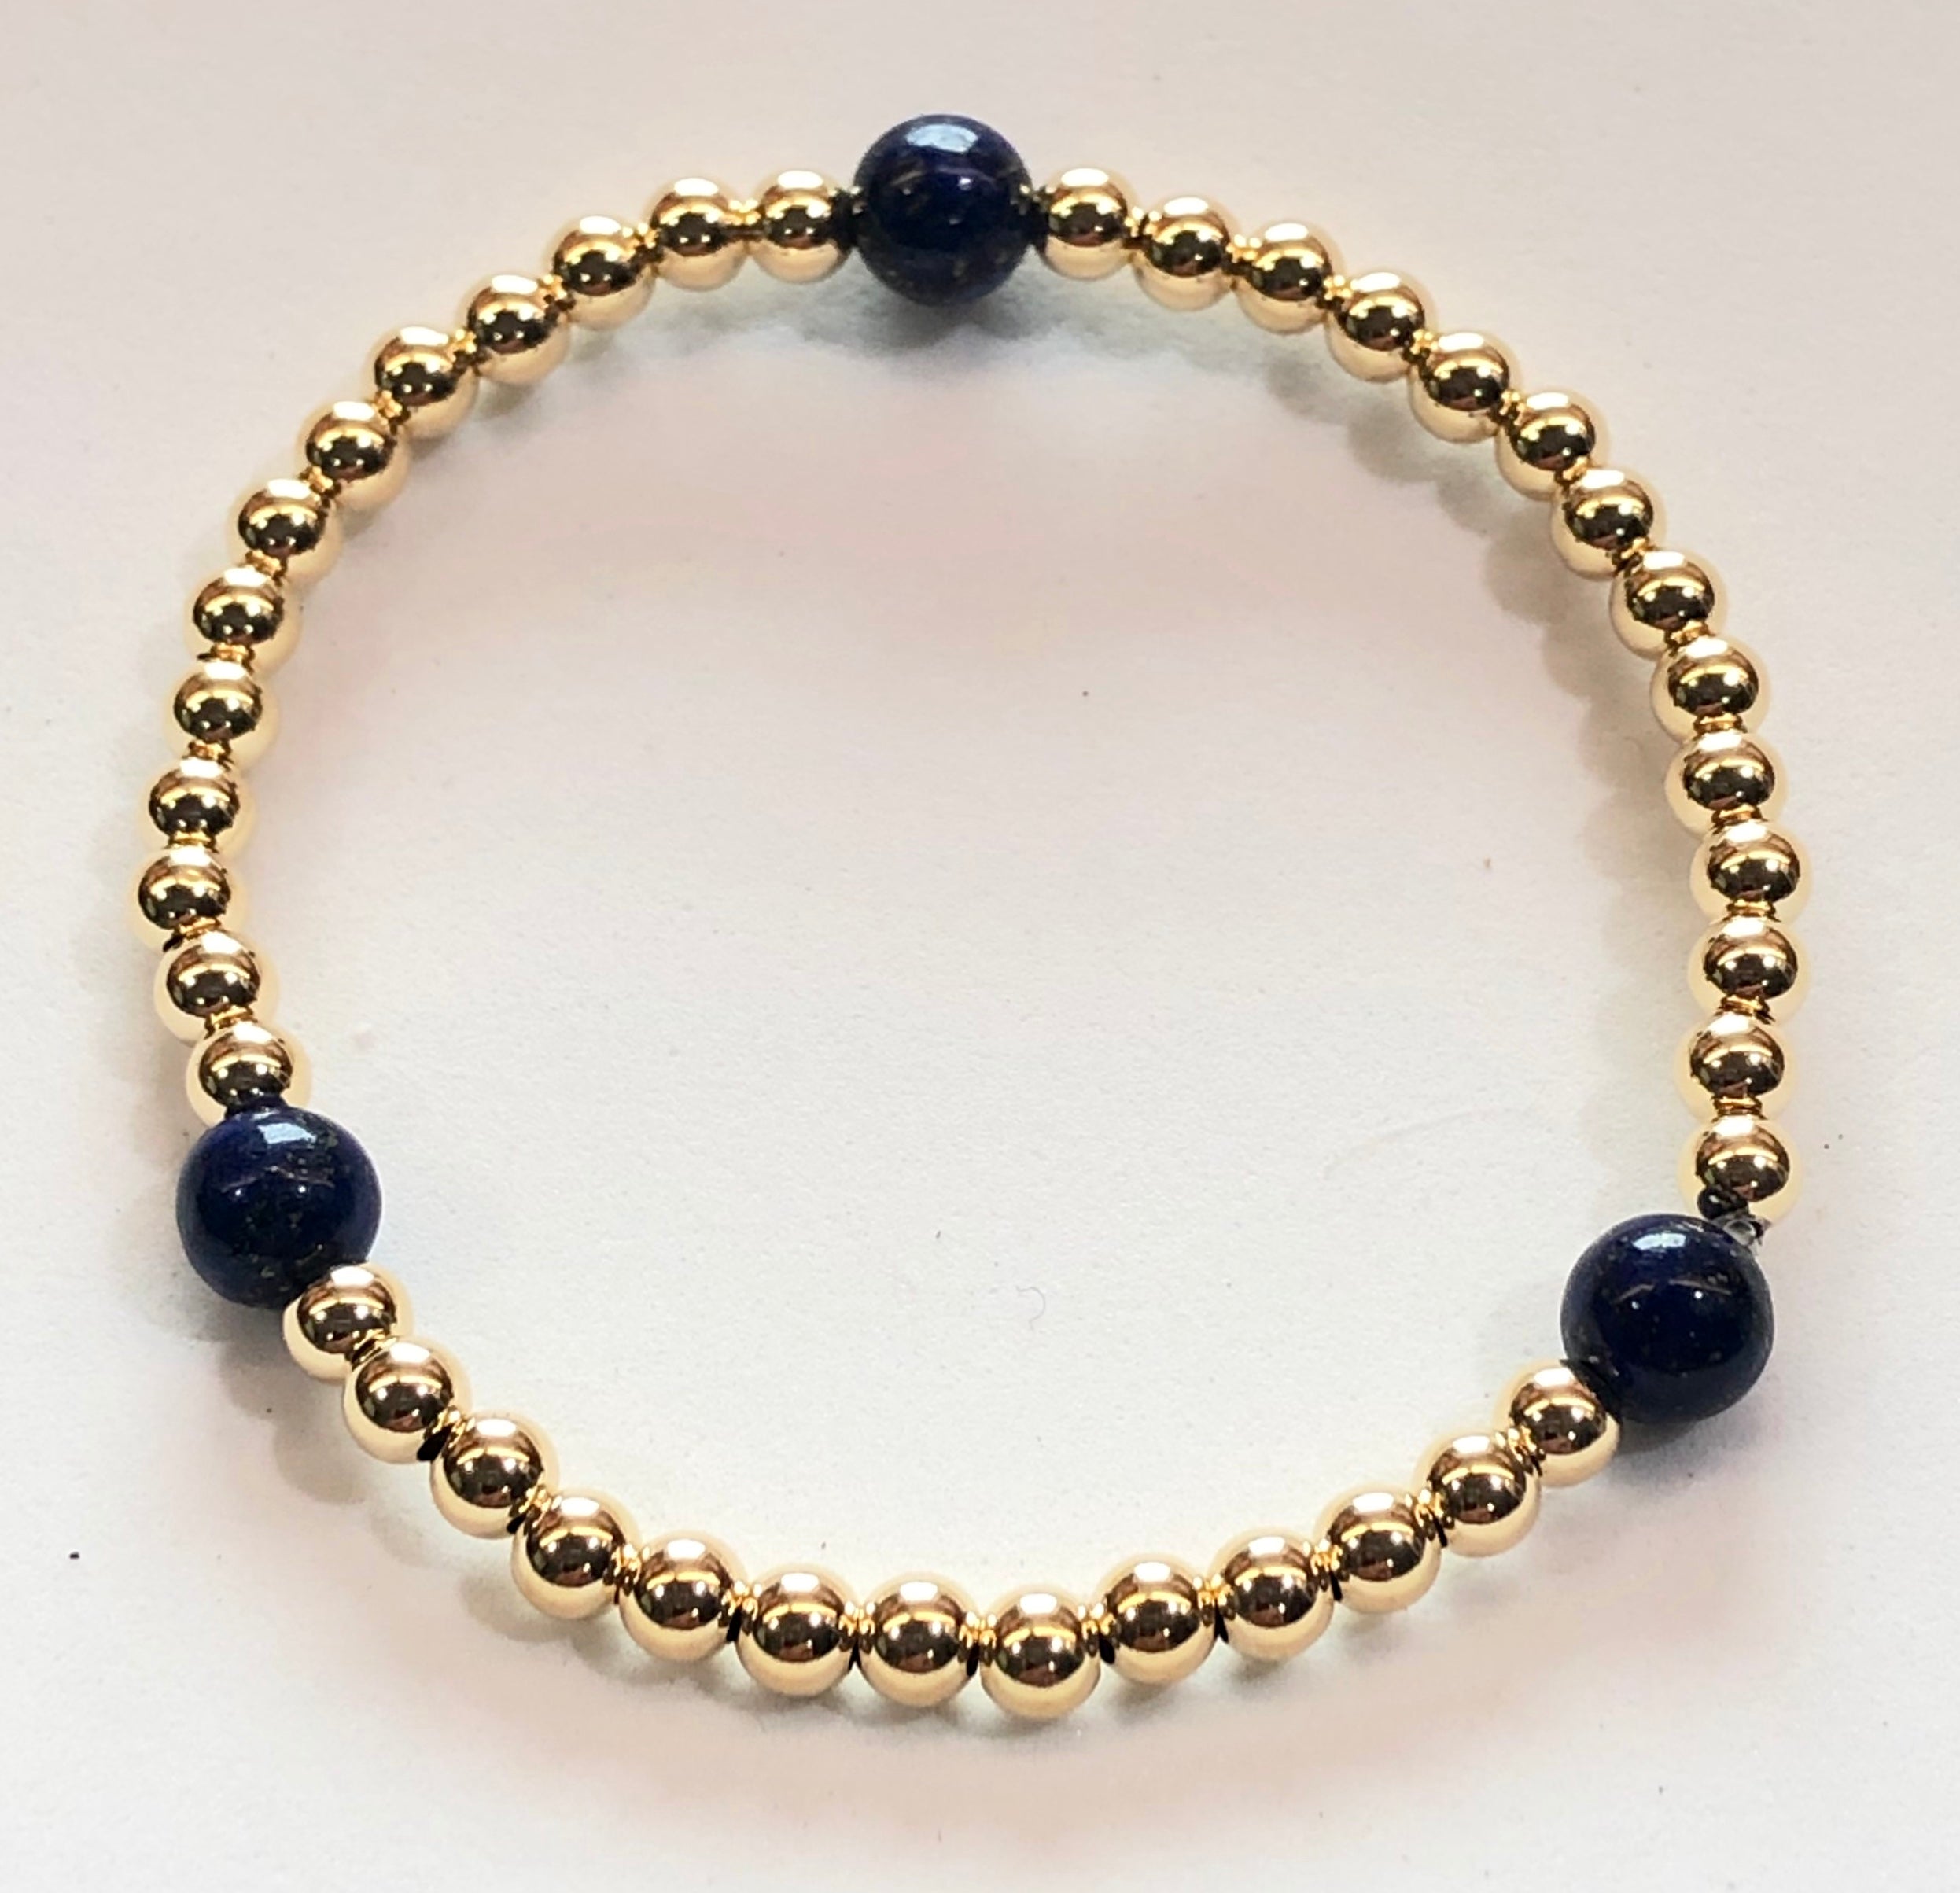 4mm 14kt Gold Filled Bead Bracelet with 3 6mm Blue Lapis Beads